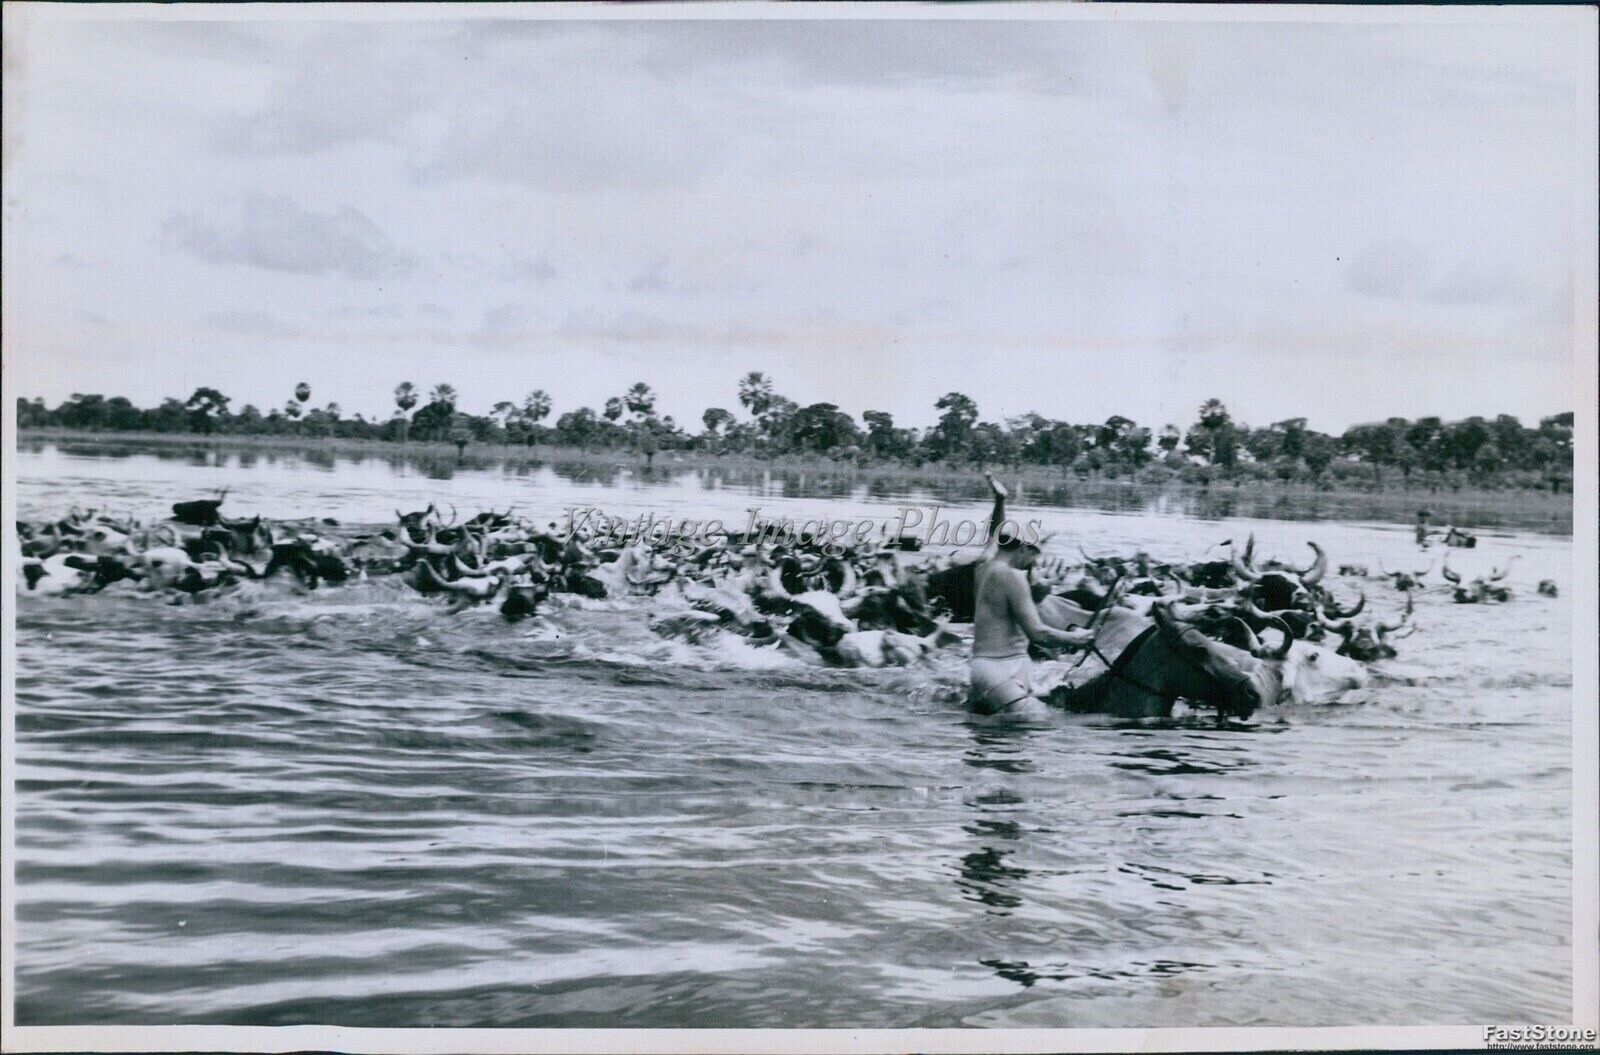 1966 Drover On Horseback Pushes Cattle Herd Across River Agriculture 6X8 Photo